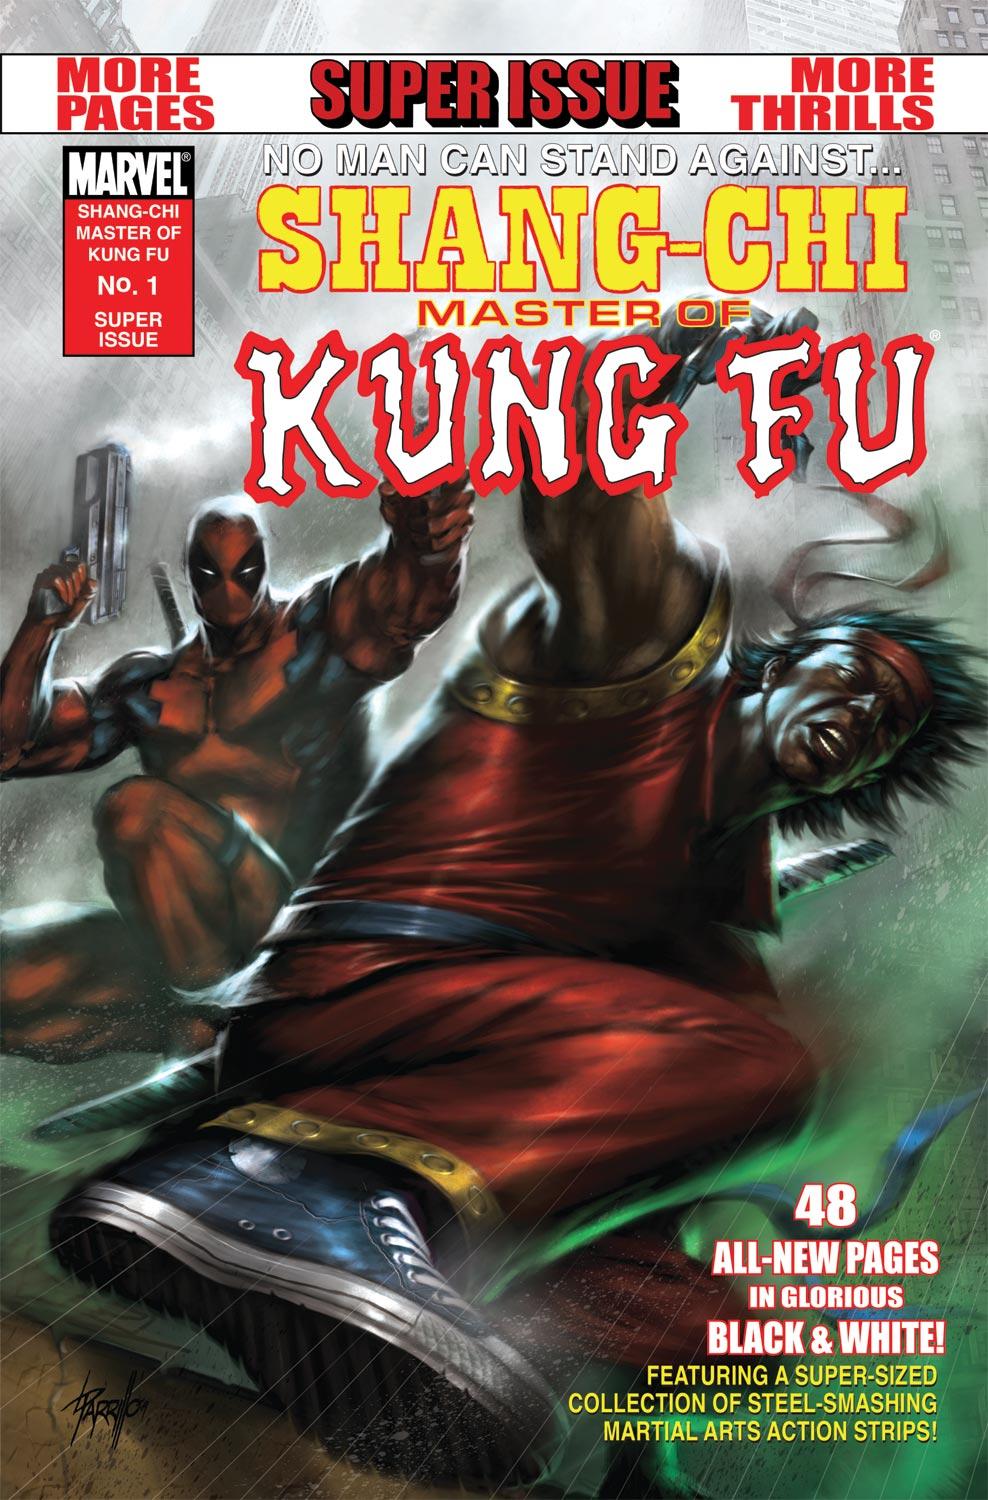 Master of Kung Fu KEY ISSUES MOVIE COMING MCU 54-124! The Hands of Shang Chi 